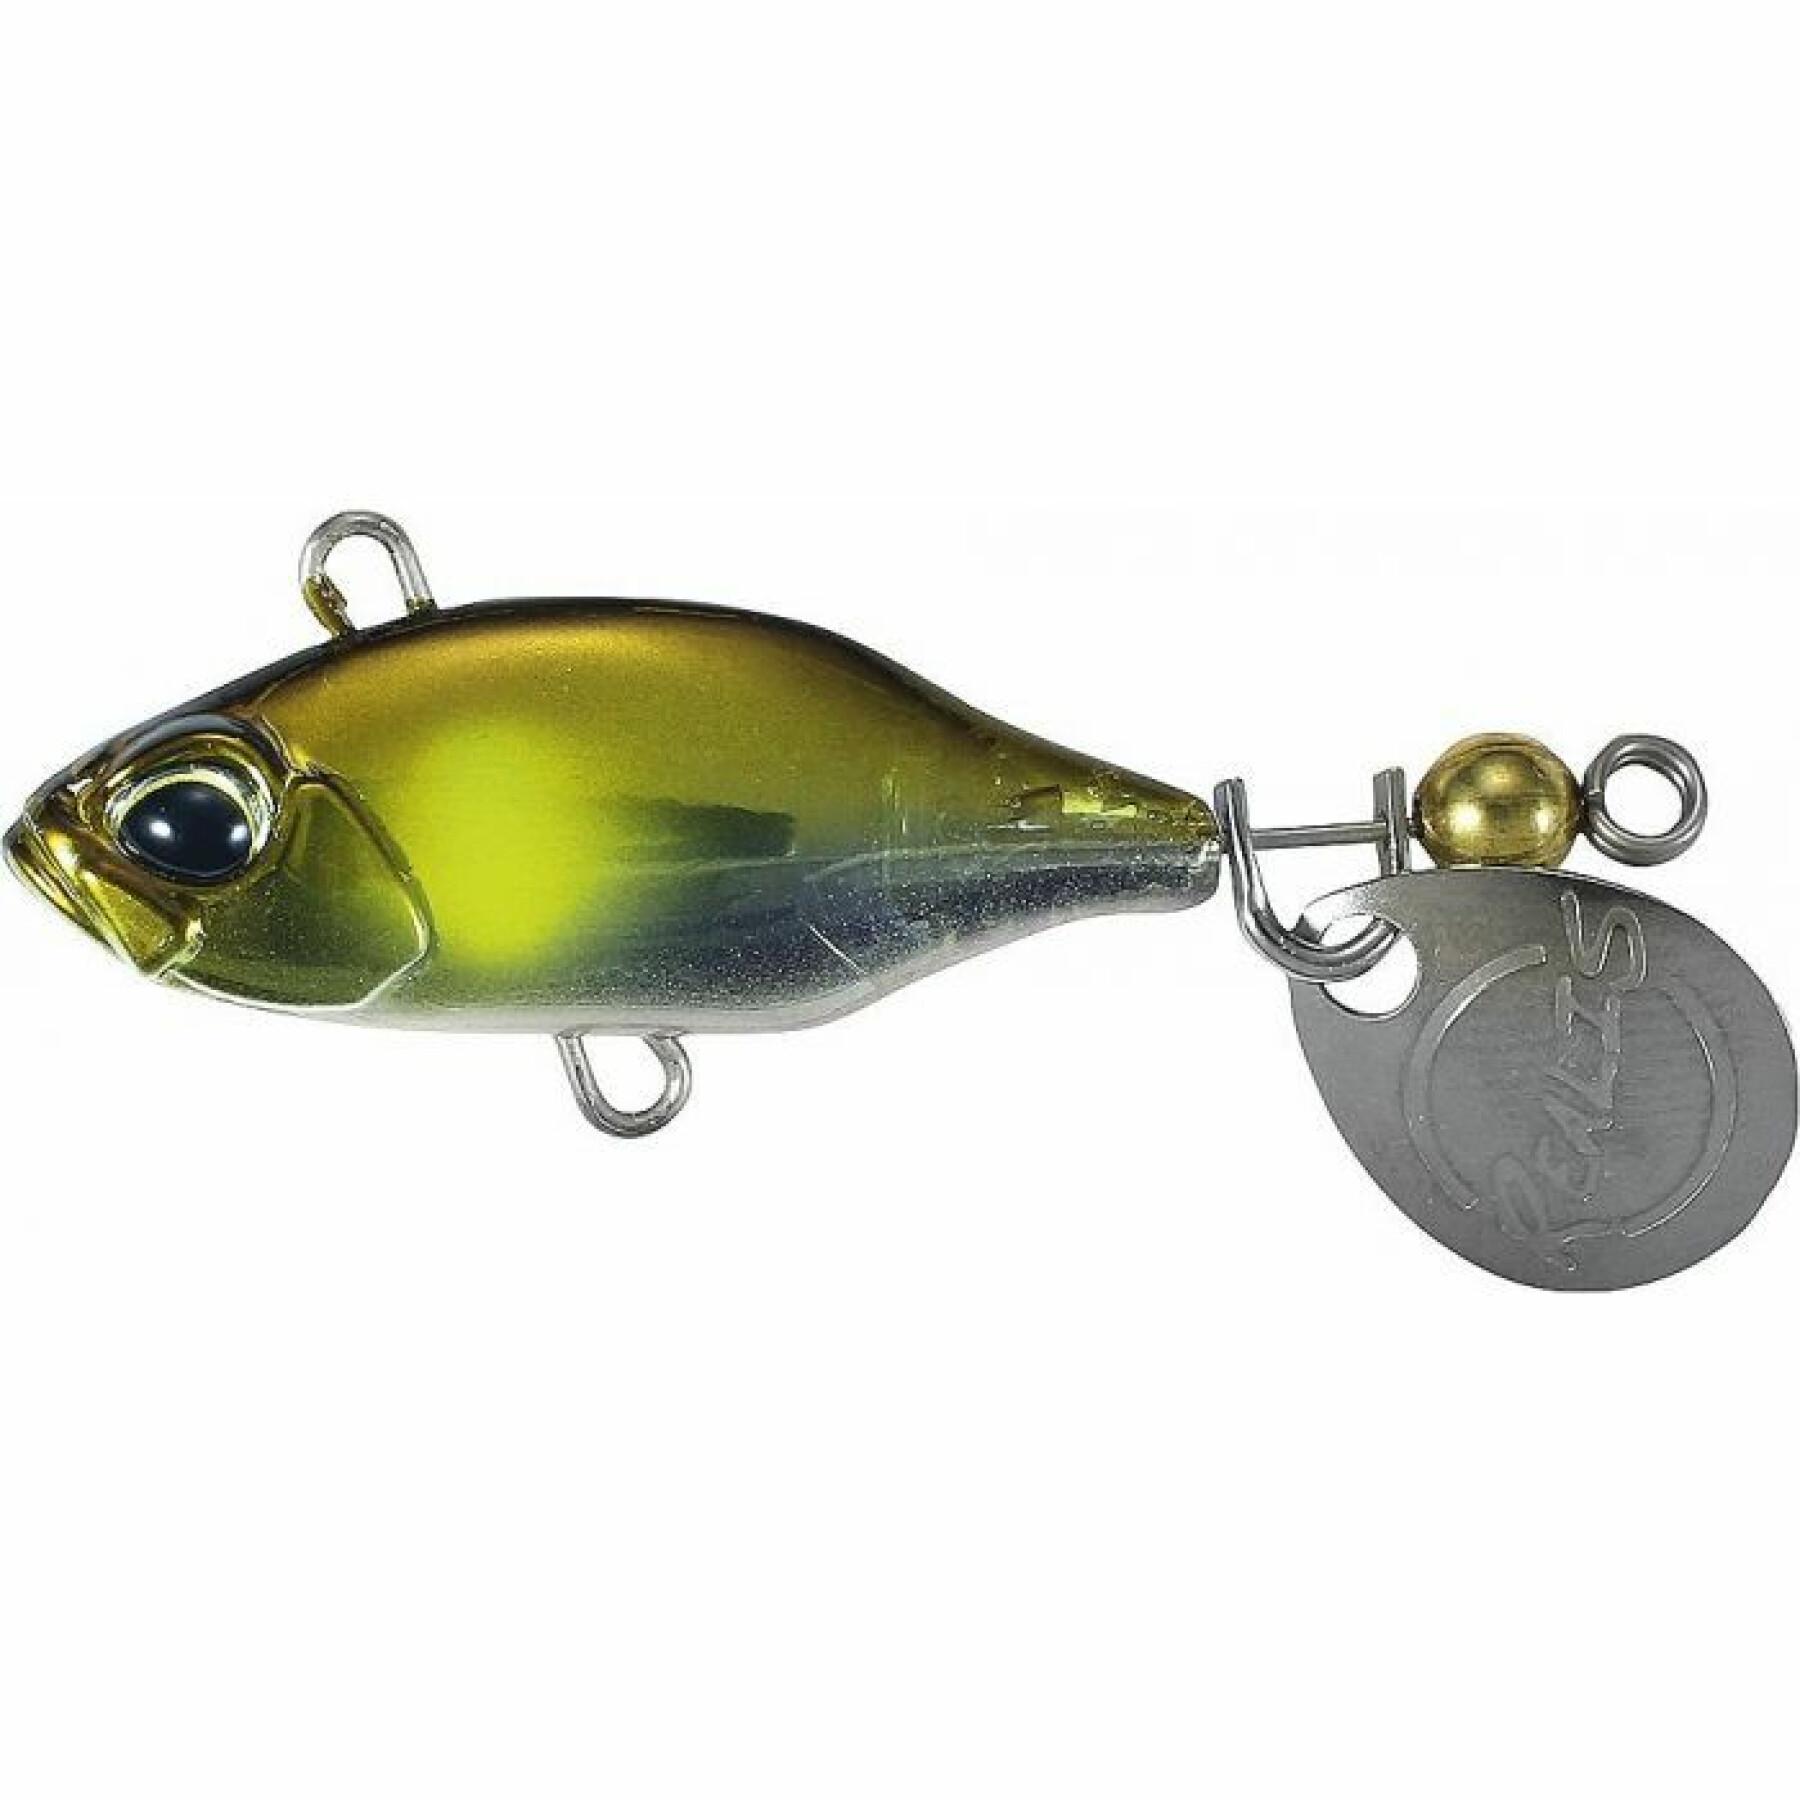 Realis spin duo kunstaas - 14g